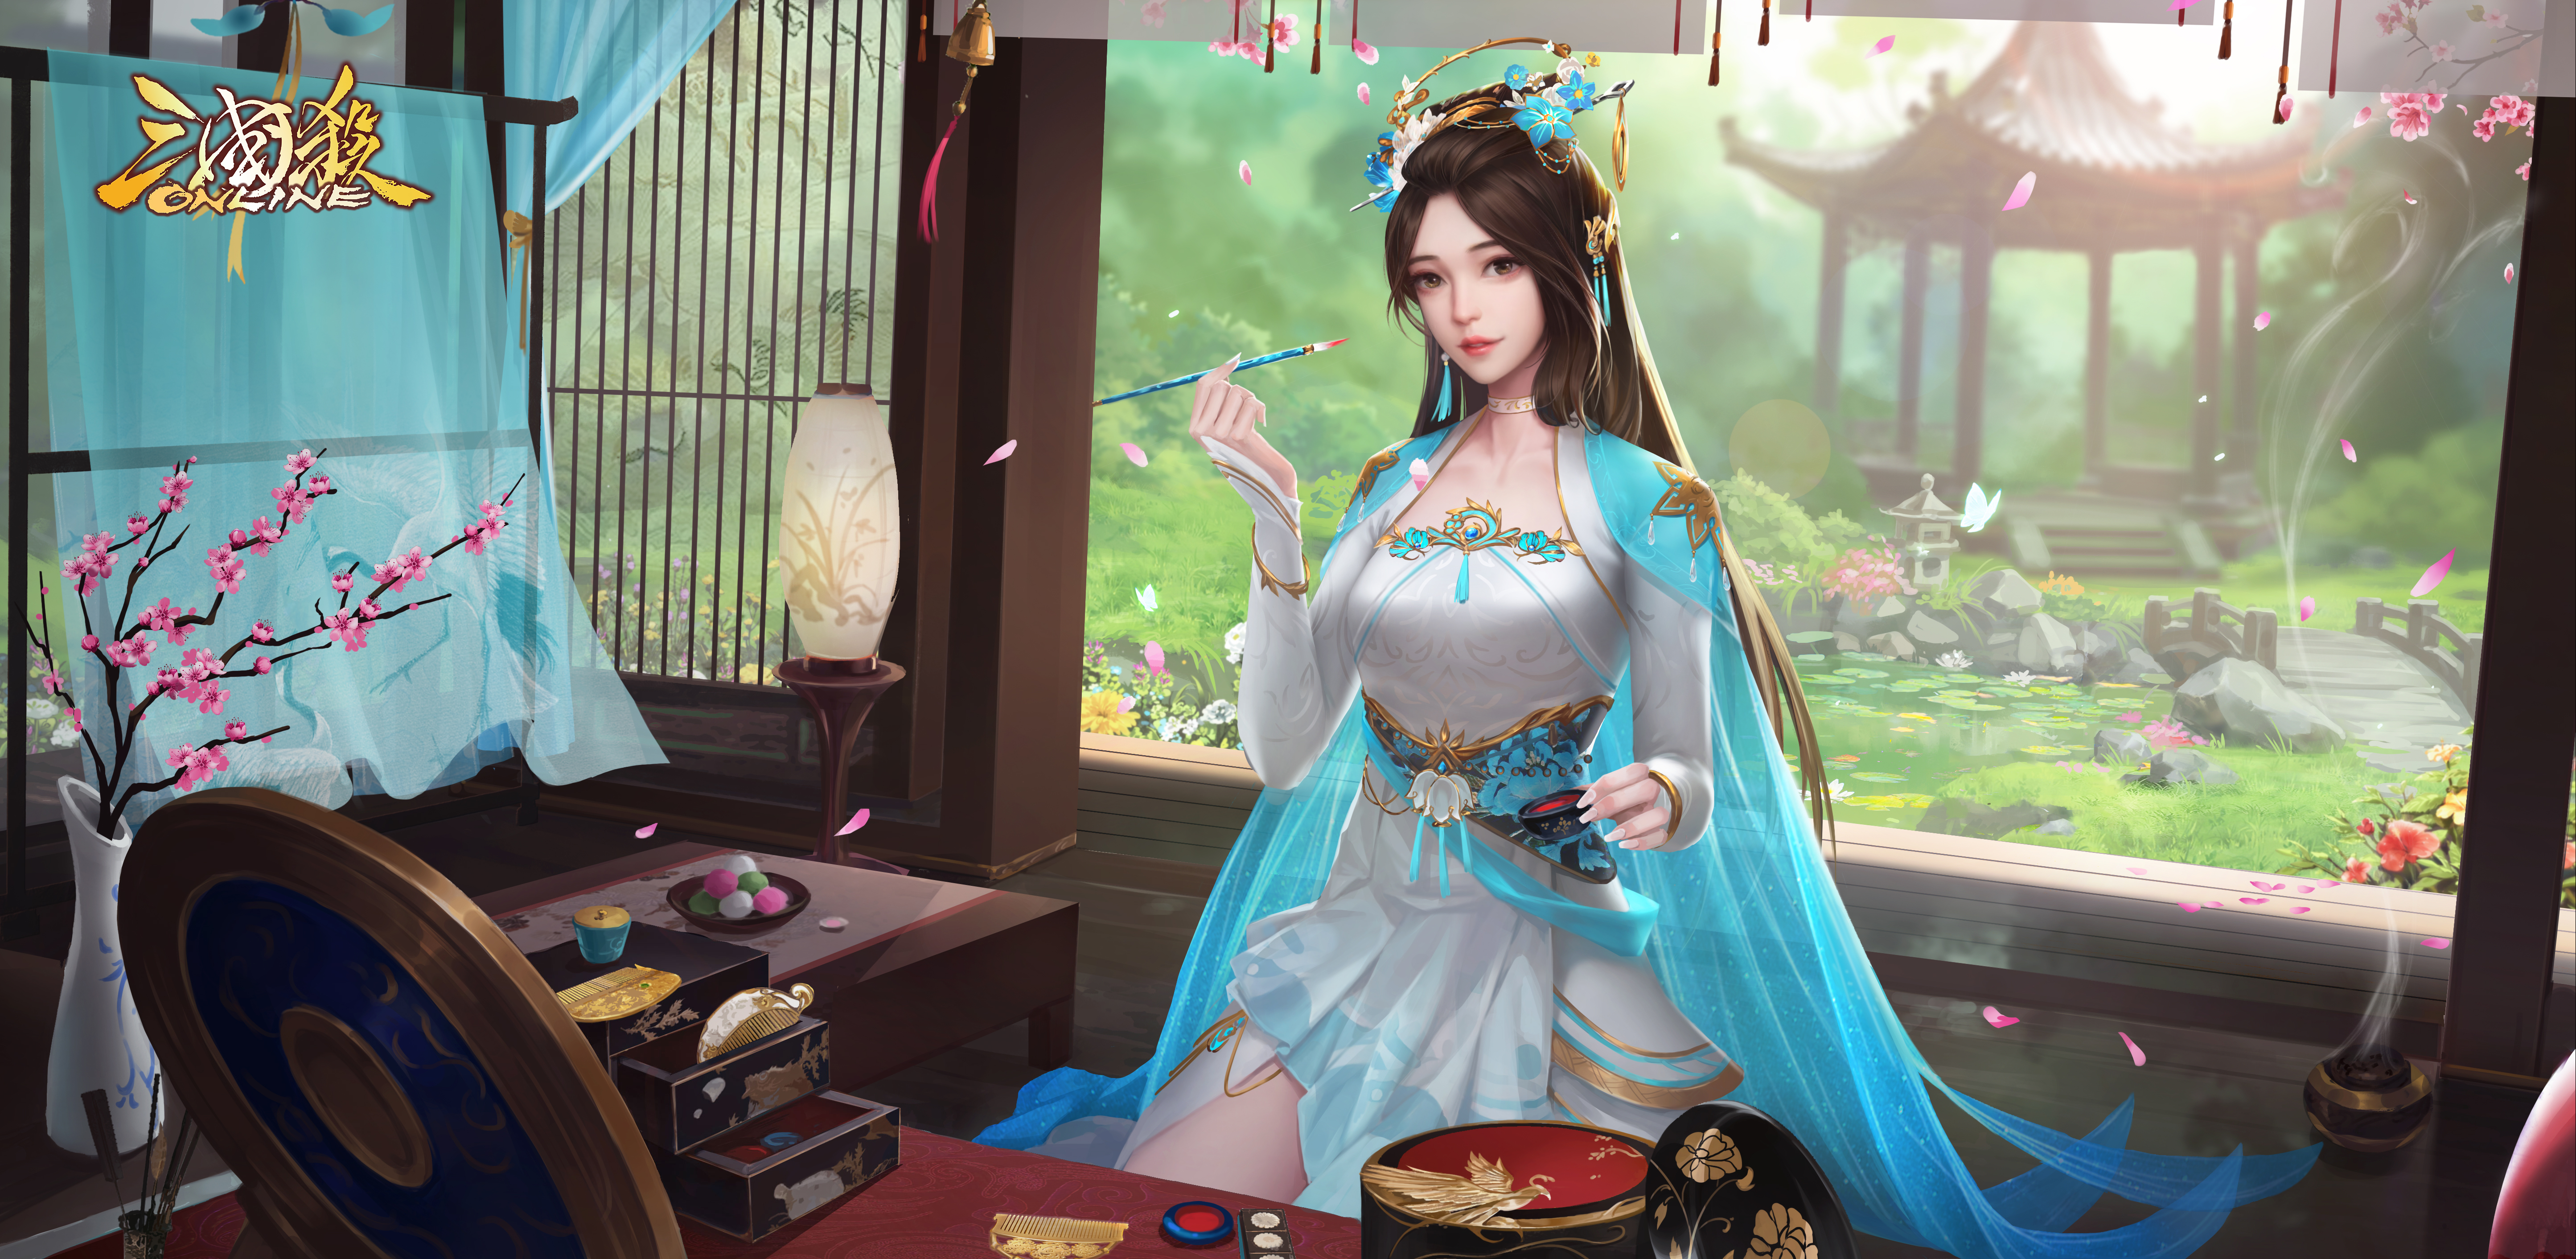 General 5779x2824 Three Kingdoms video game characters video games video game art video game girls petals flowers